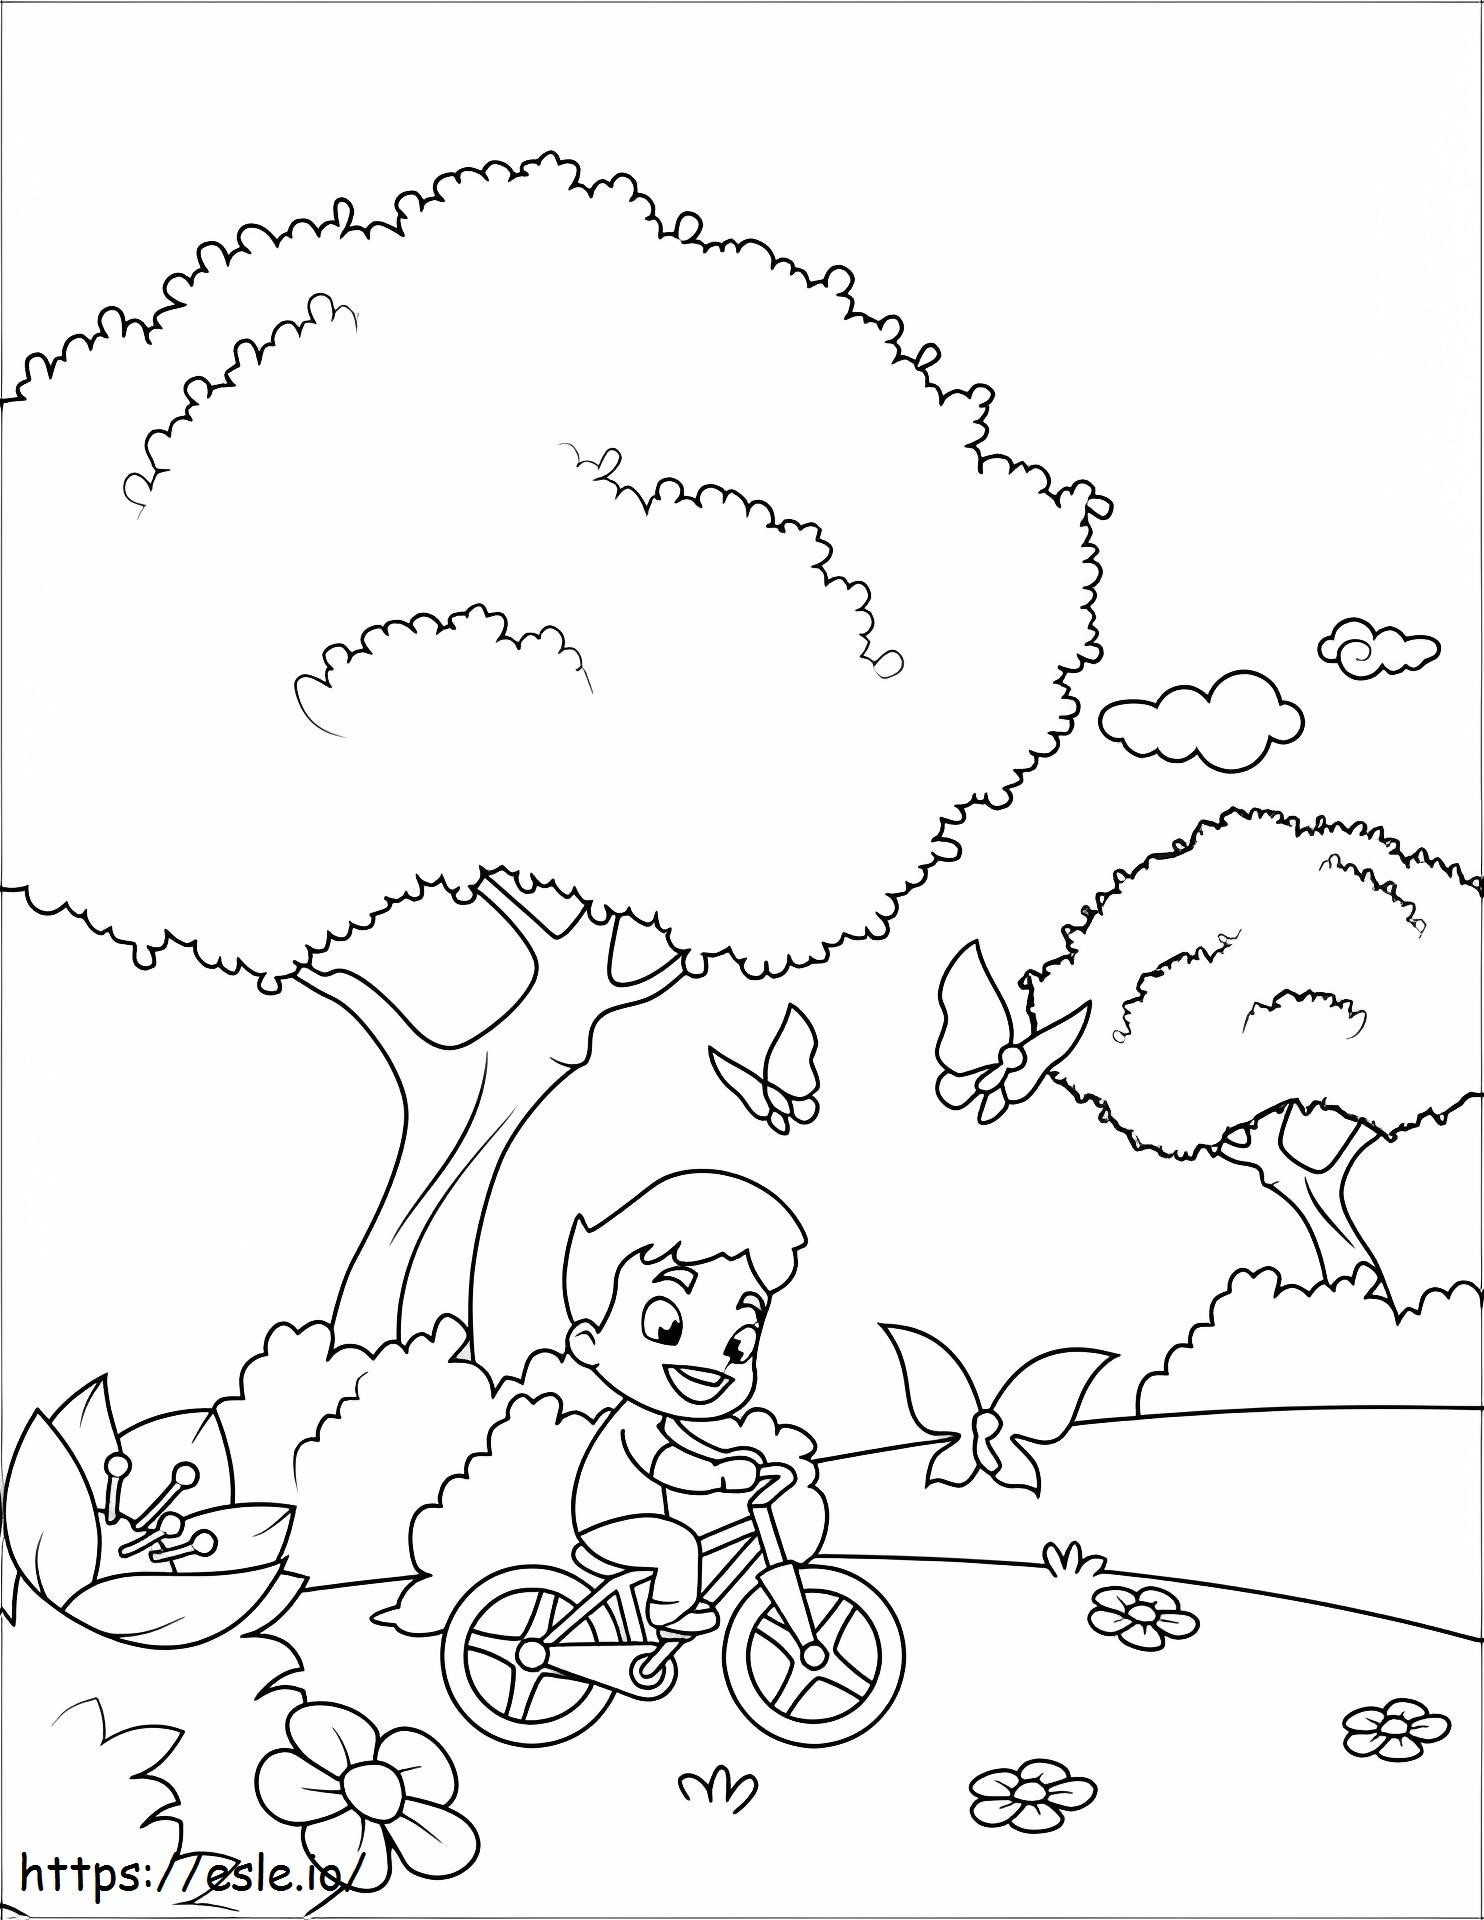 1533009167 Little Boy Bicycling A4 coloring page